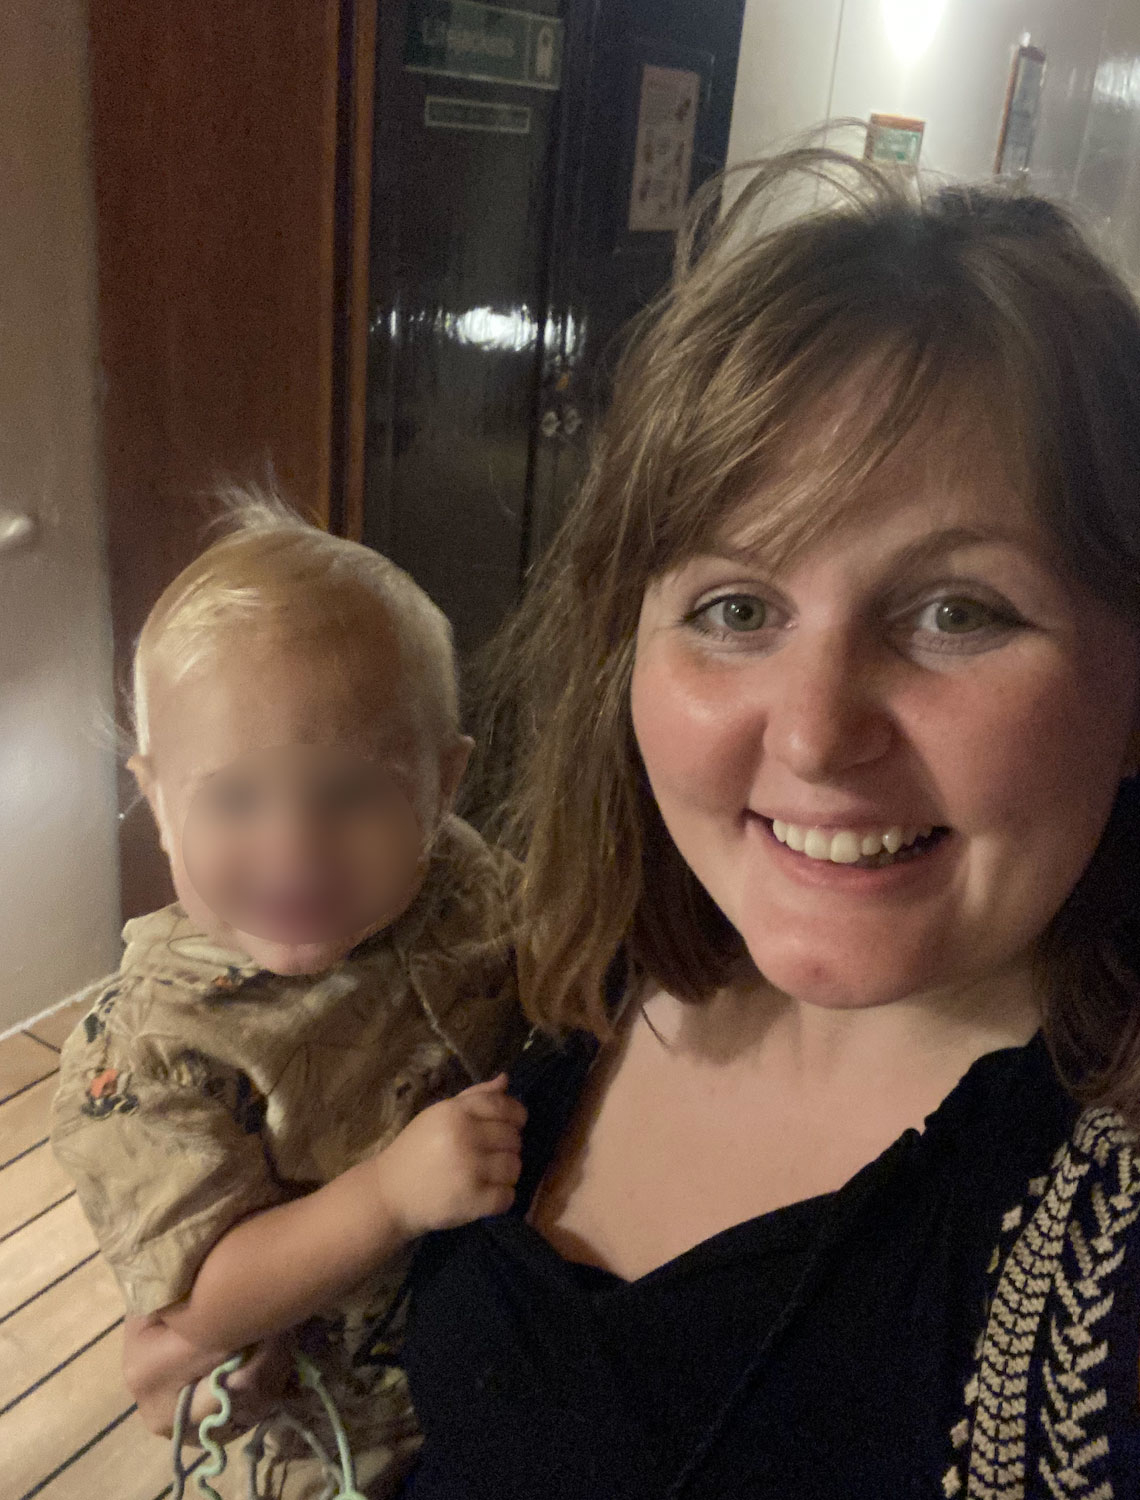 A woman smiling while holding a young child. The child&#x27;s face is blurred